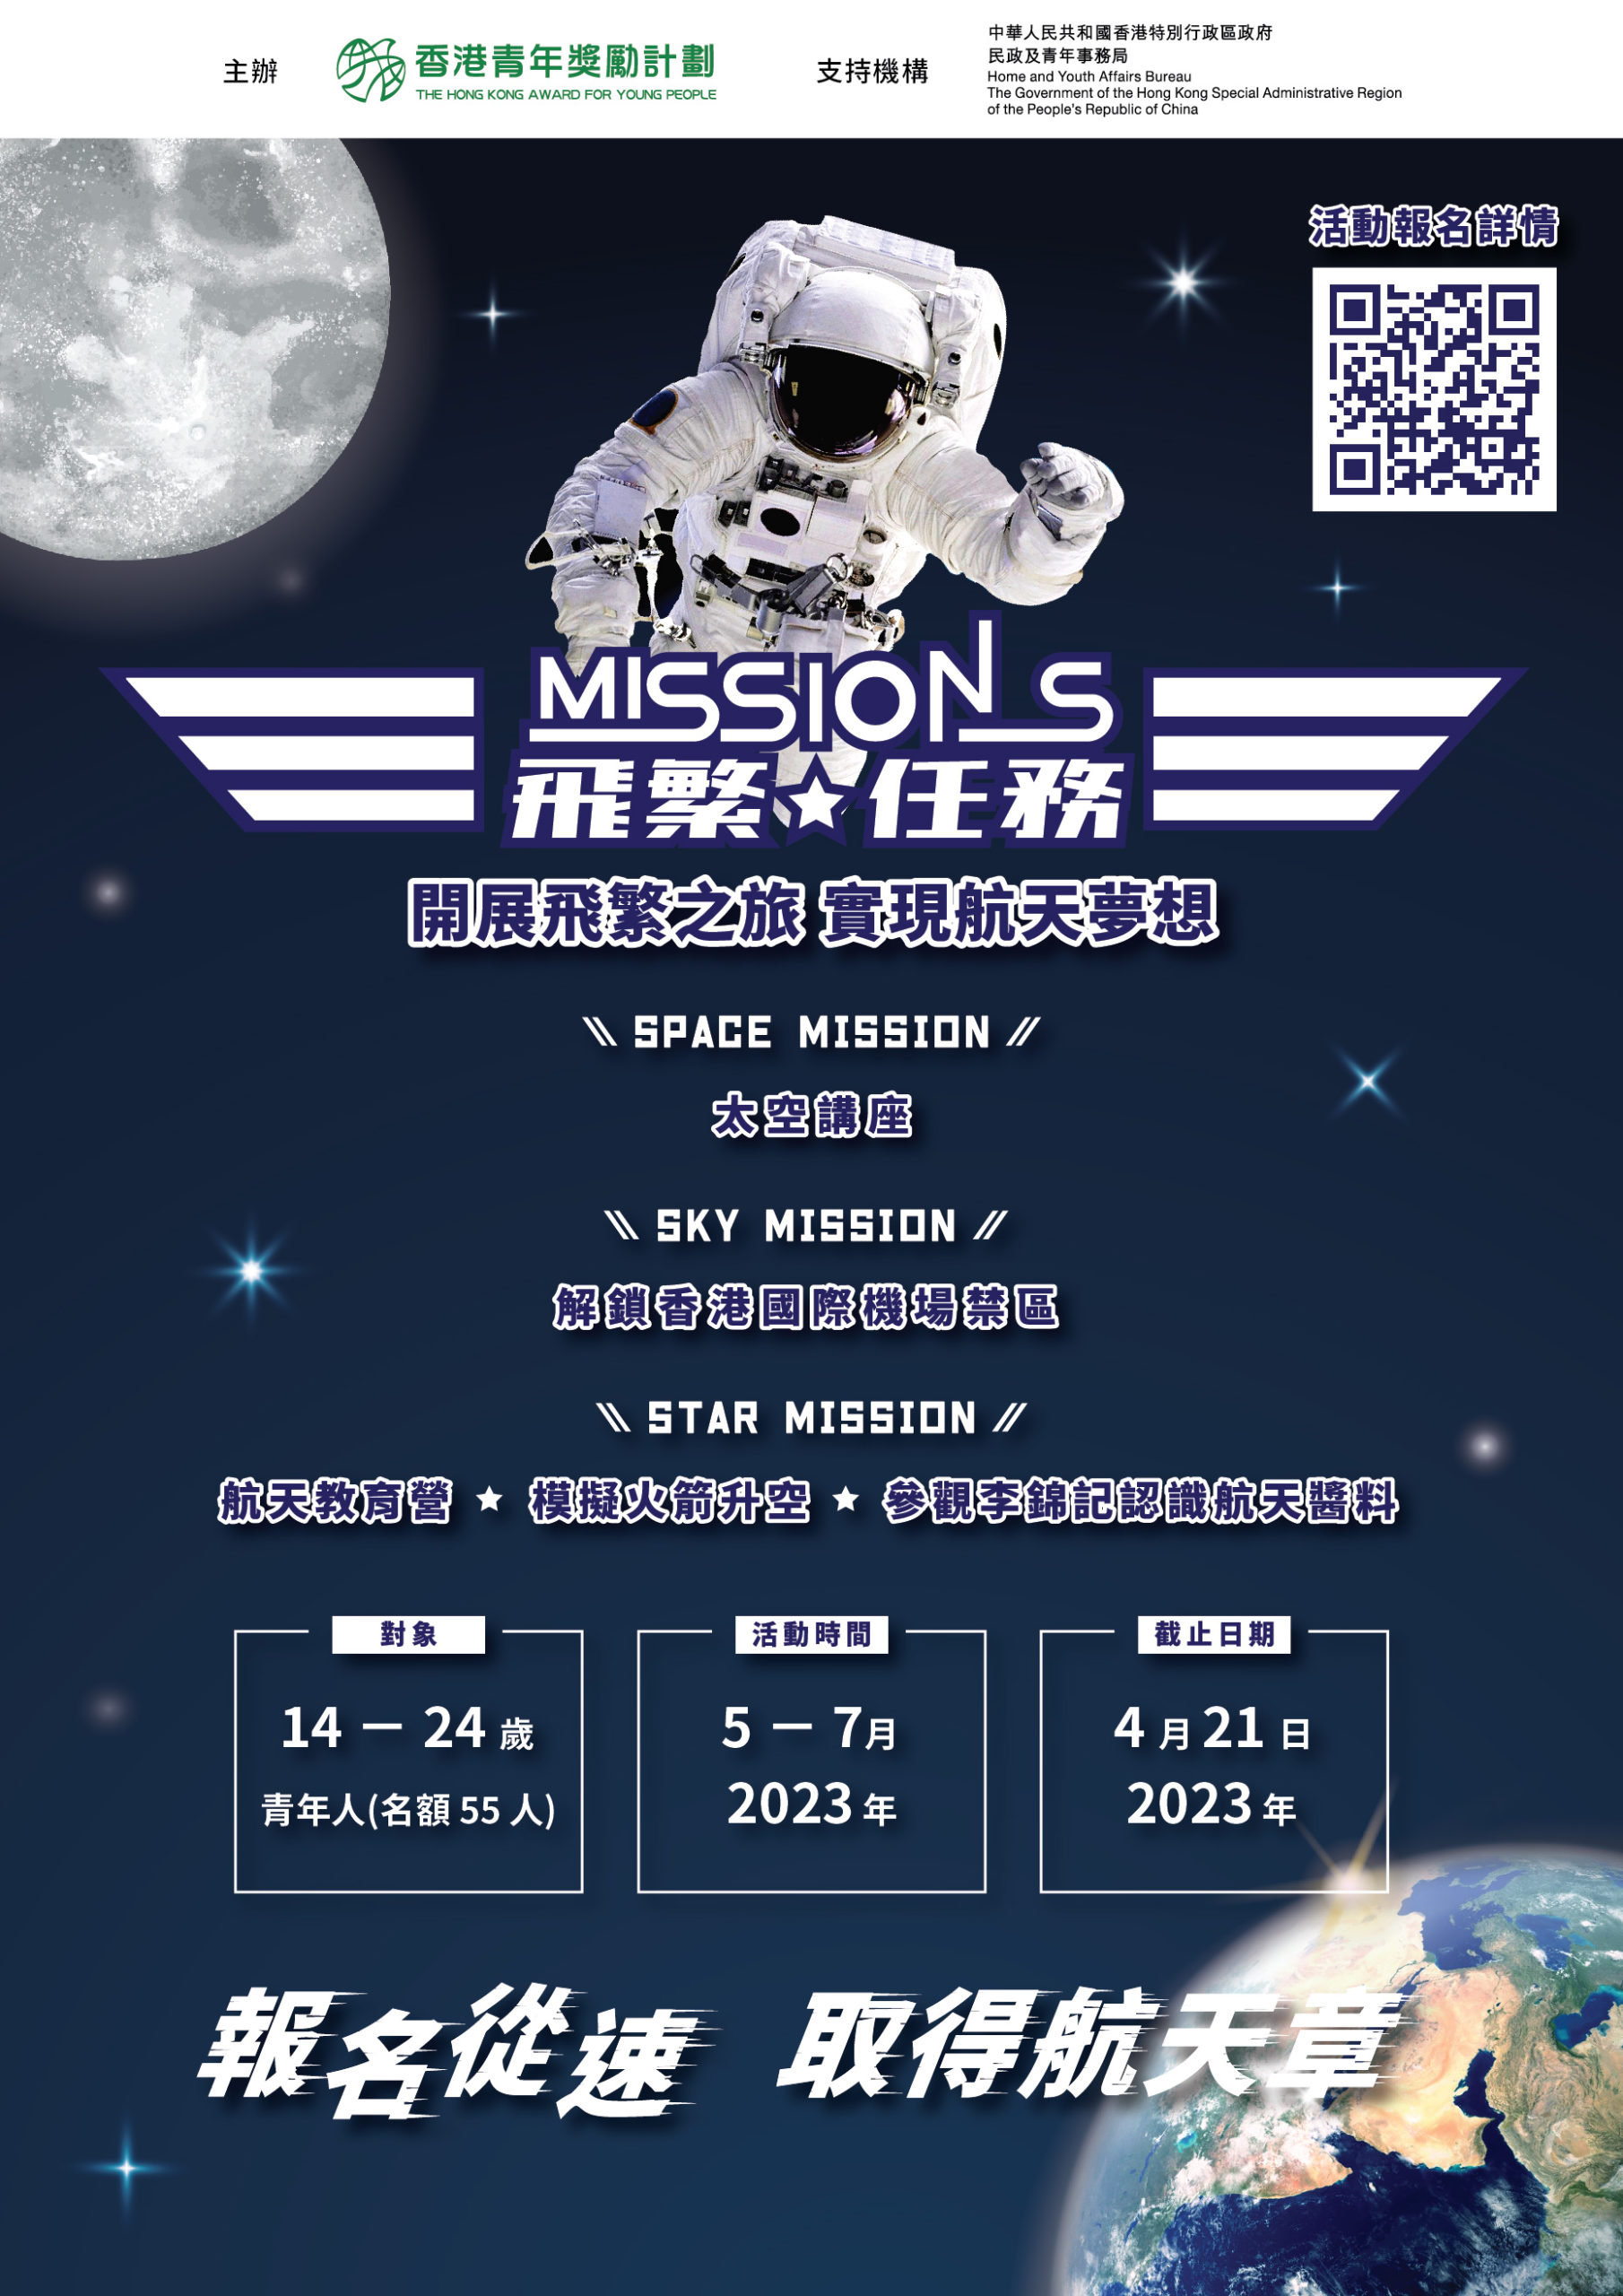 MissionS_2.0_Poster